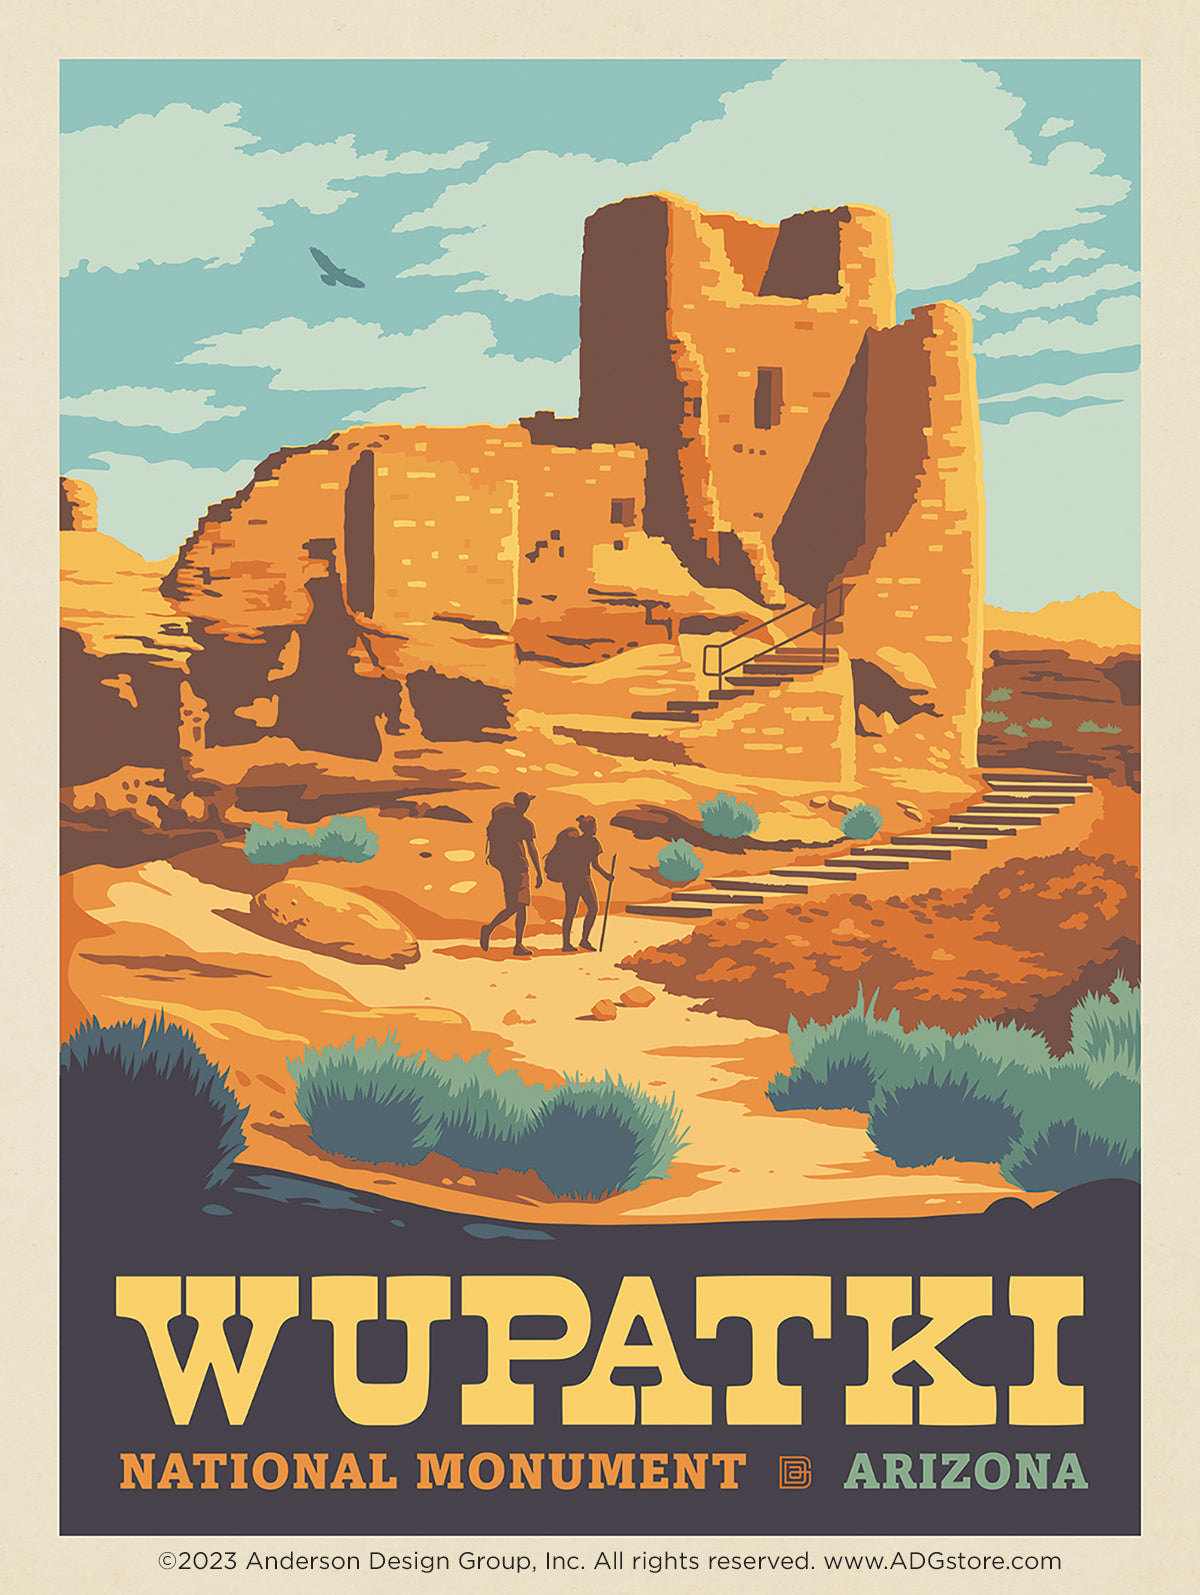 ADG Embarks on a Mission to Create Poster Art of Lesser-Known National Park Service Sites!